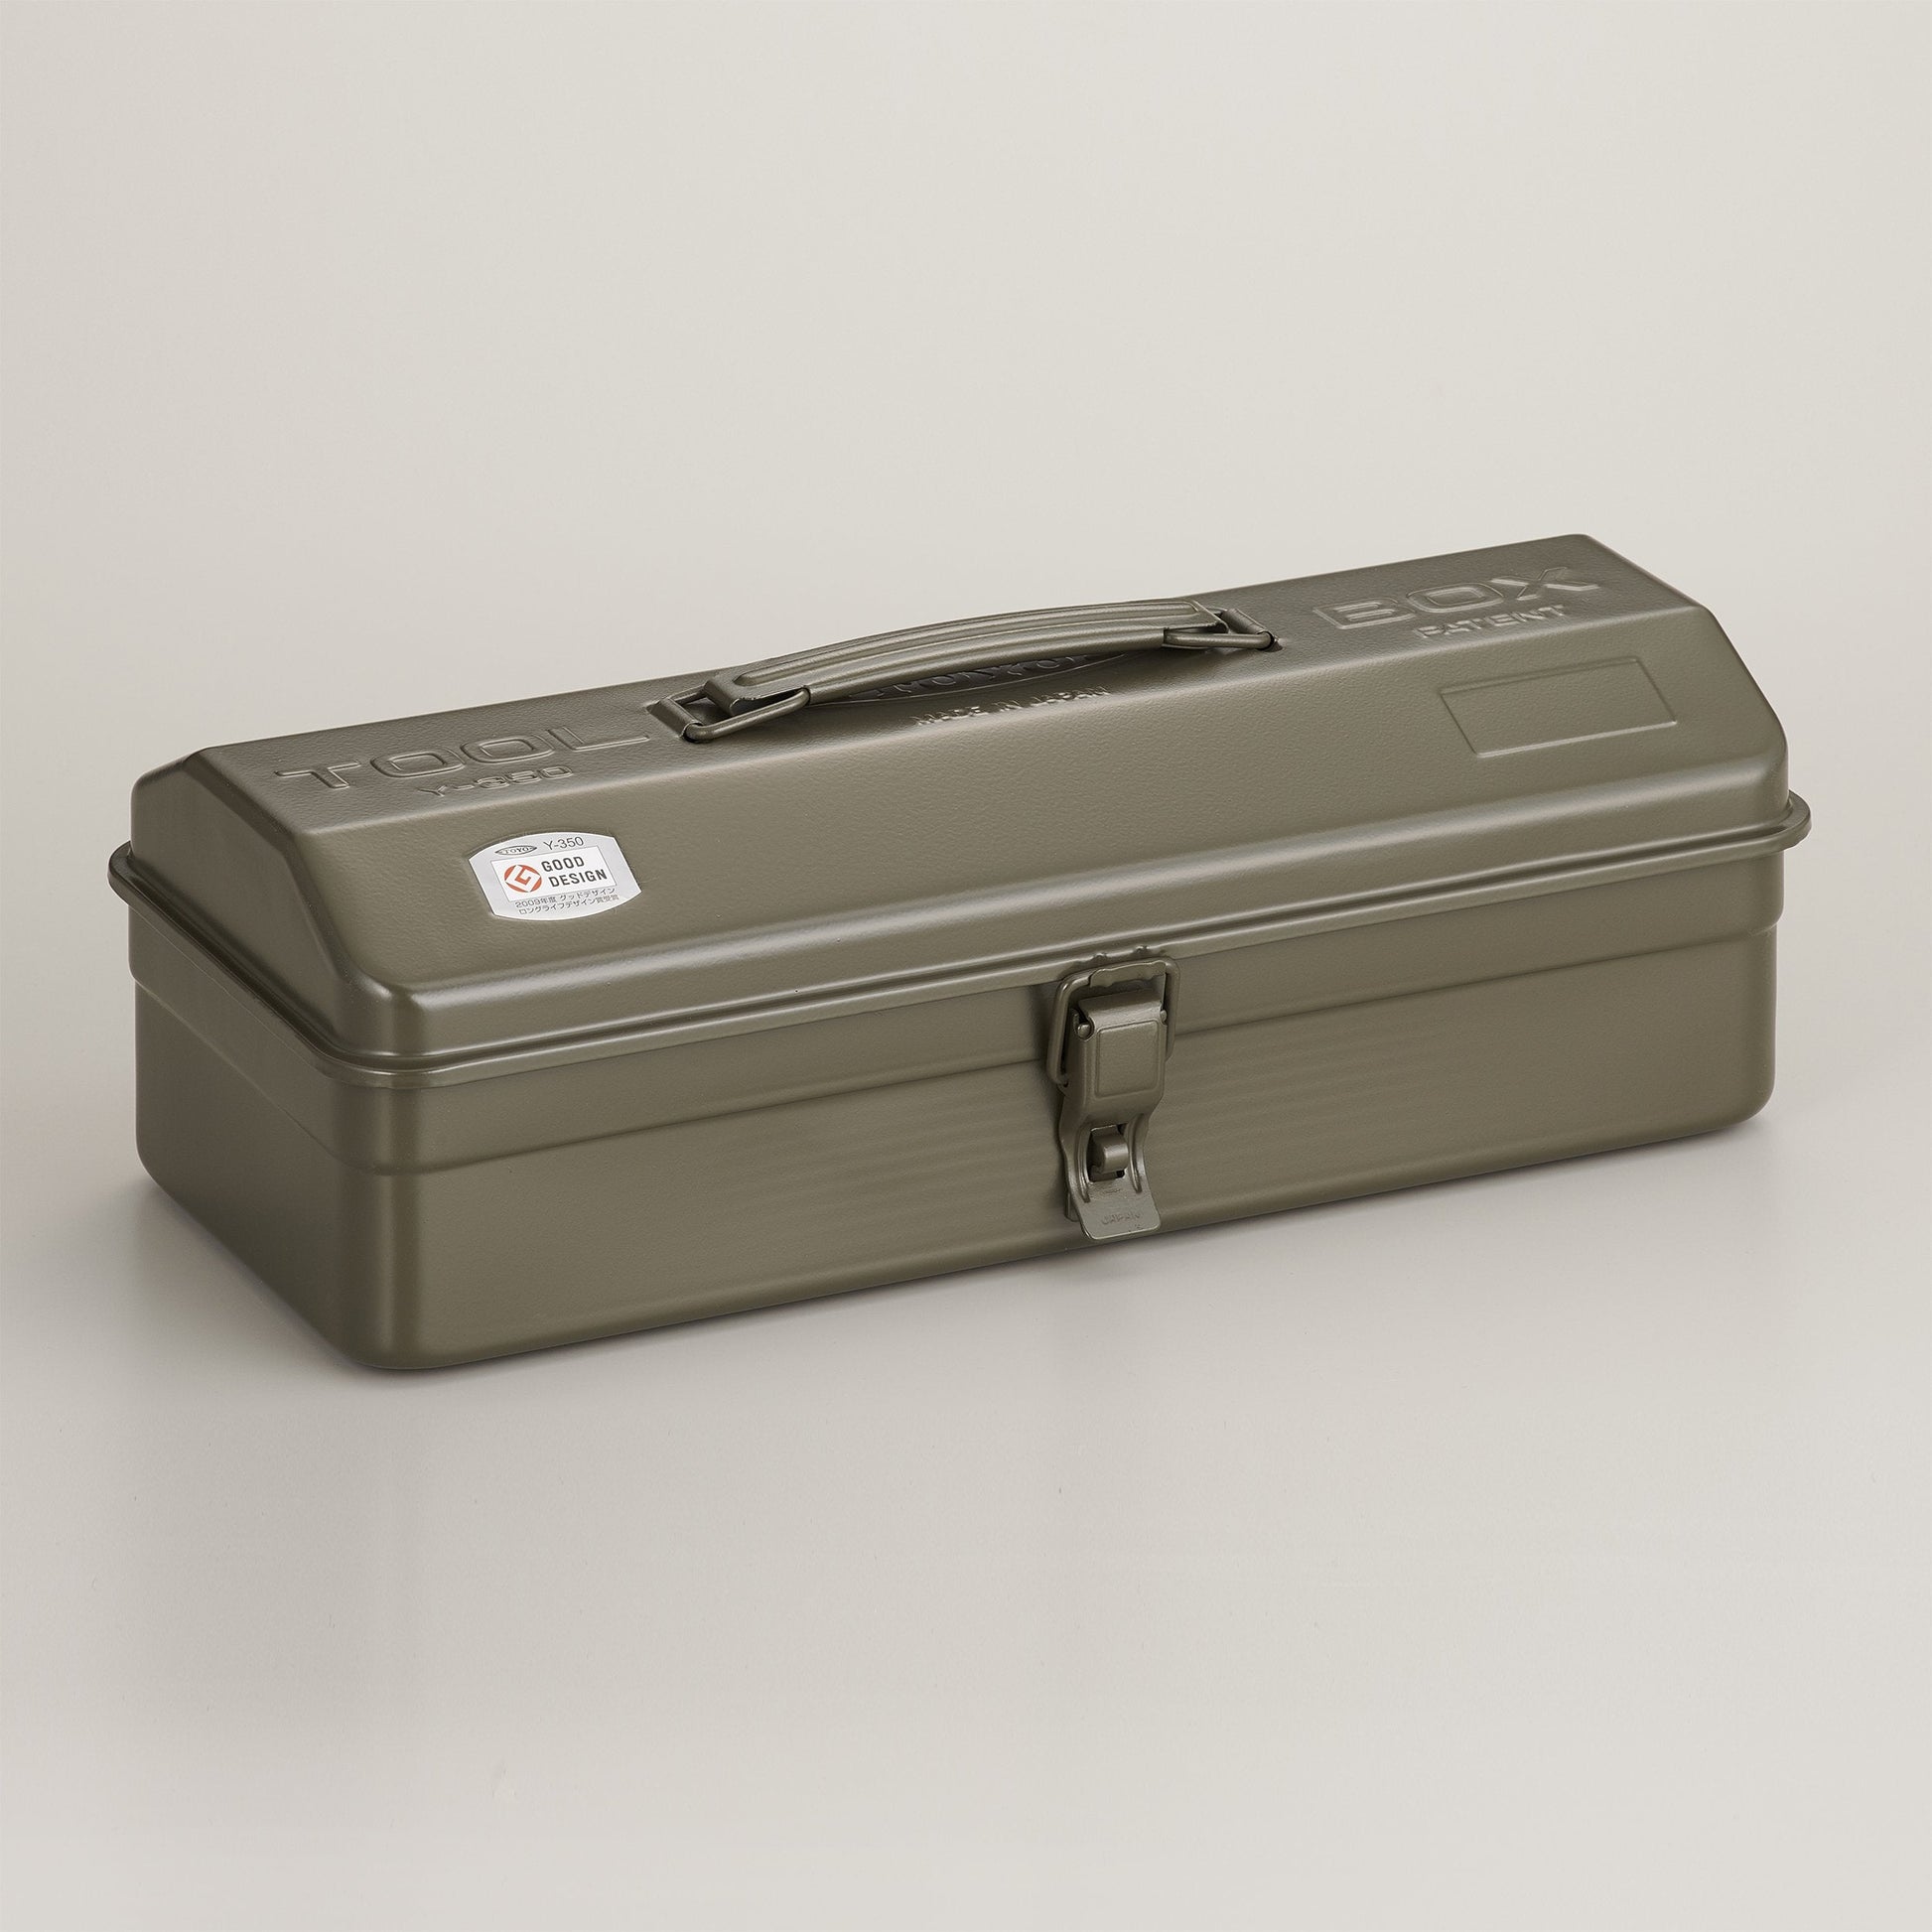 Steel Toolbox with Top Handle and Camber Lid, style Y-350